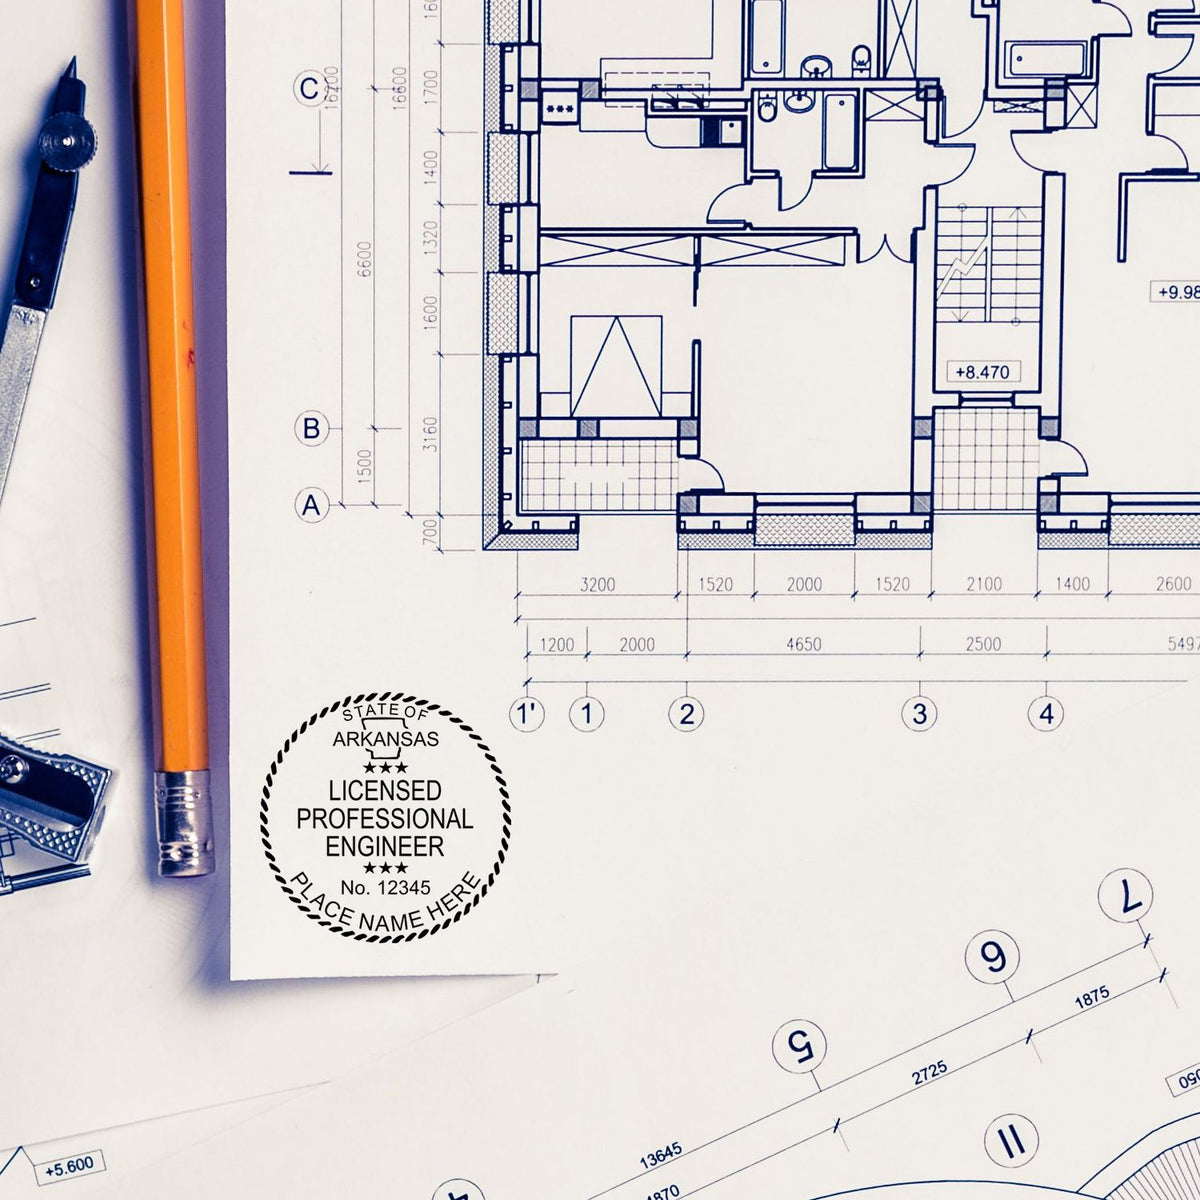 The Premium MaxLight Pre-Inked Arkansas Engineering Stamp stamp impression comes to life with a crisp, detailed photo on paper - showcasing true professional quality.